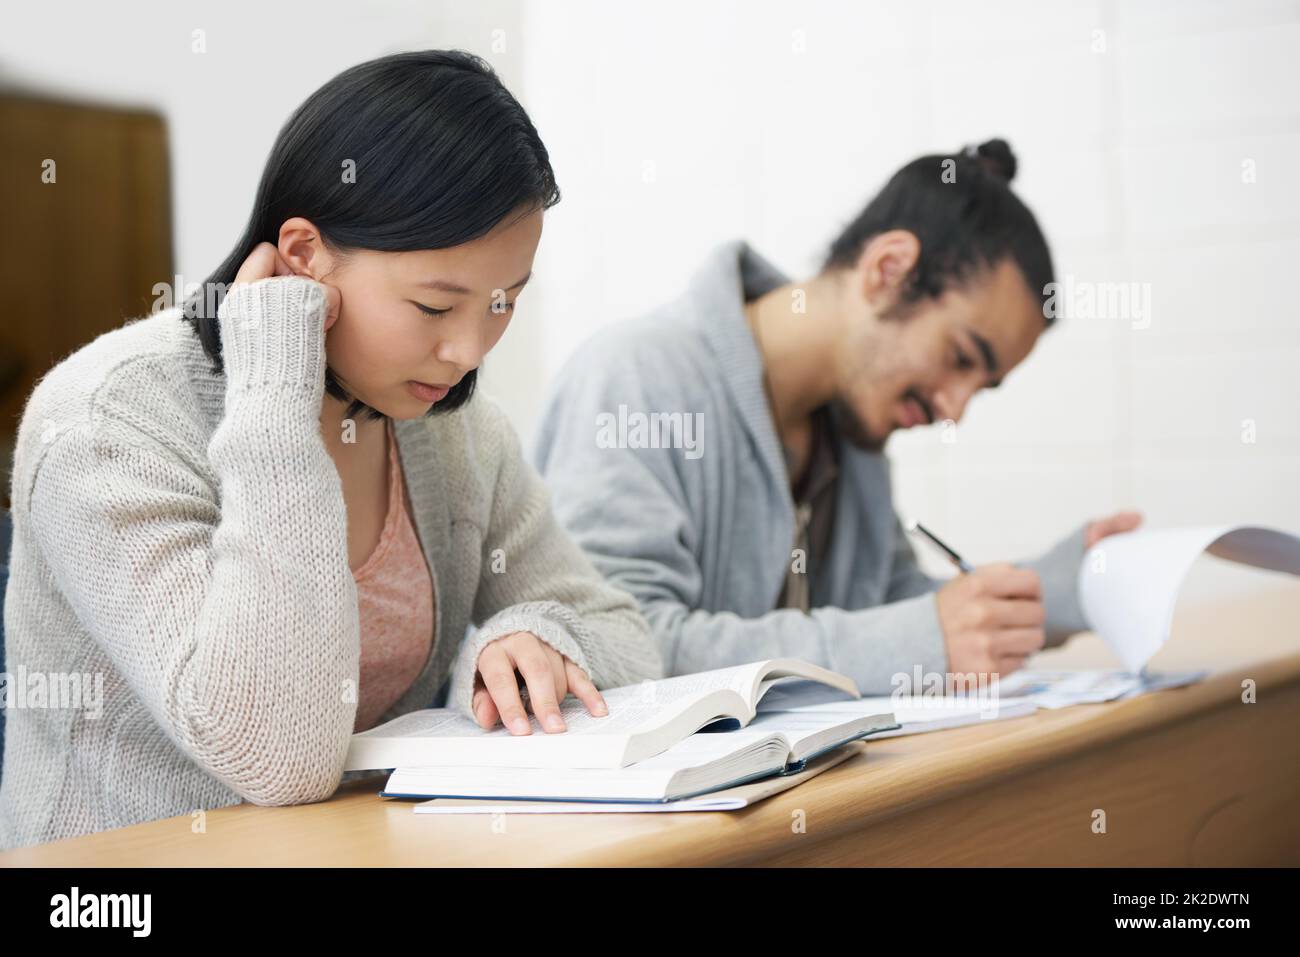 This test could change their lives for the worse or for the better.... Image of two students sitting in a lecture hall and studying for exams. Stock Photo